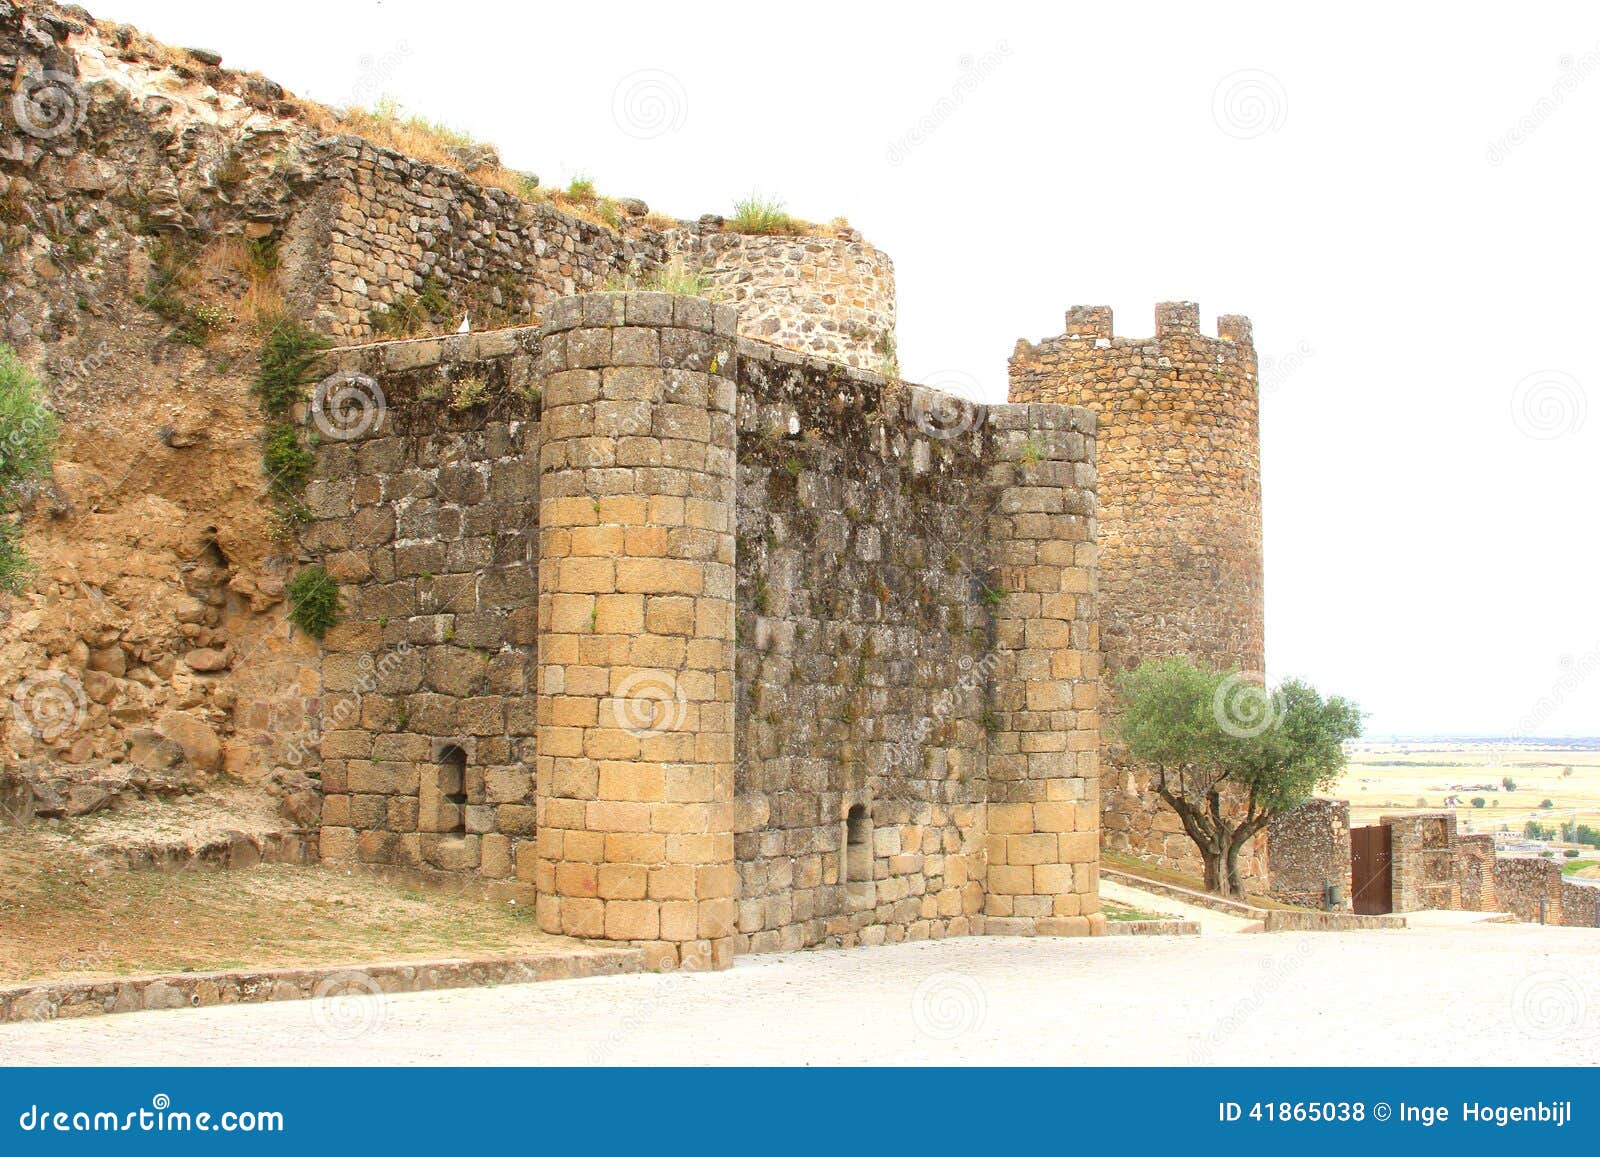 ancient castle in oropesa,province toledo,spain